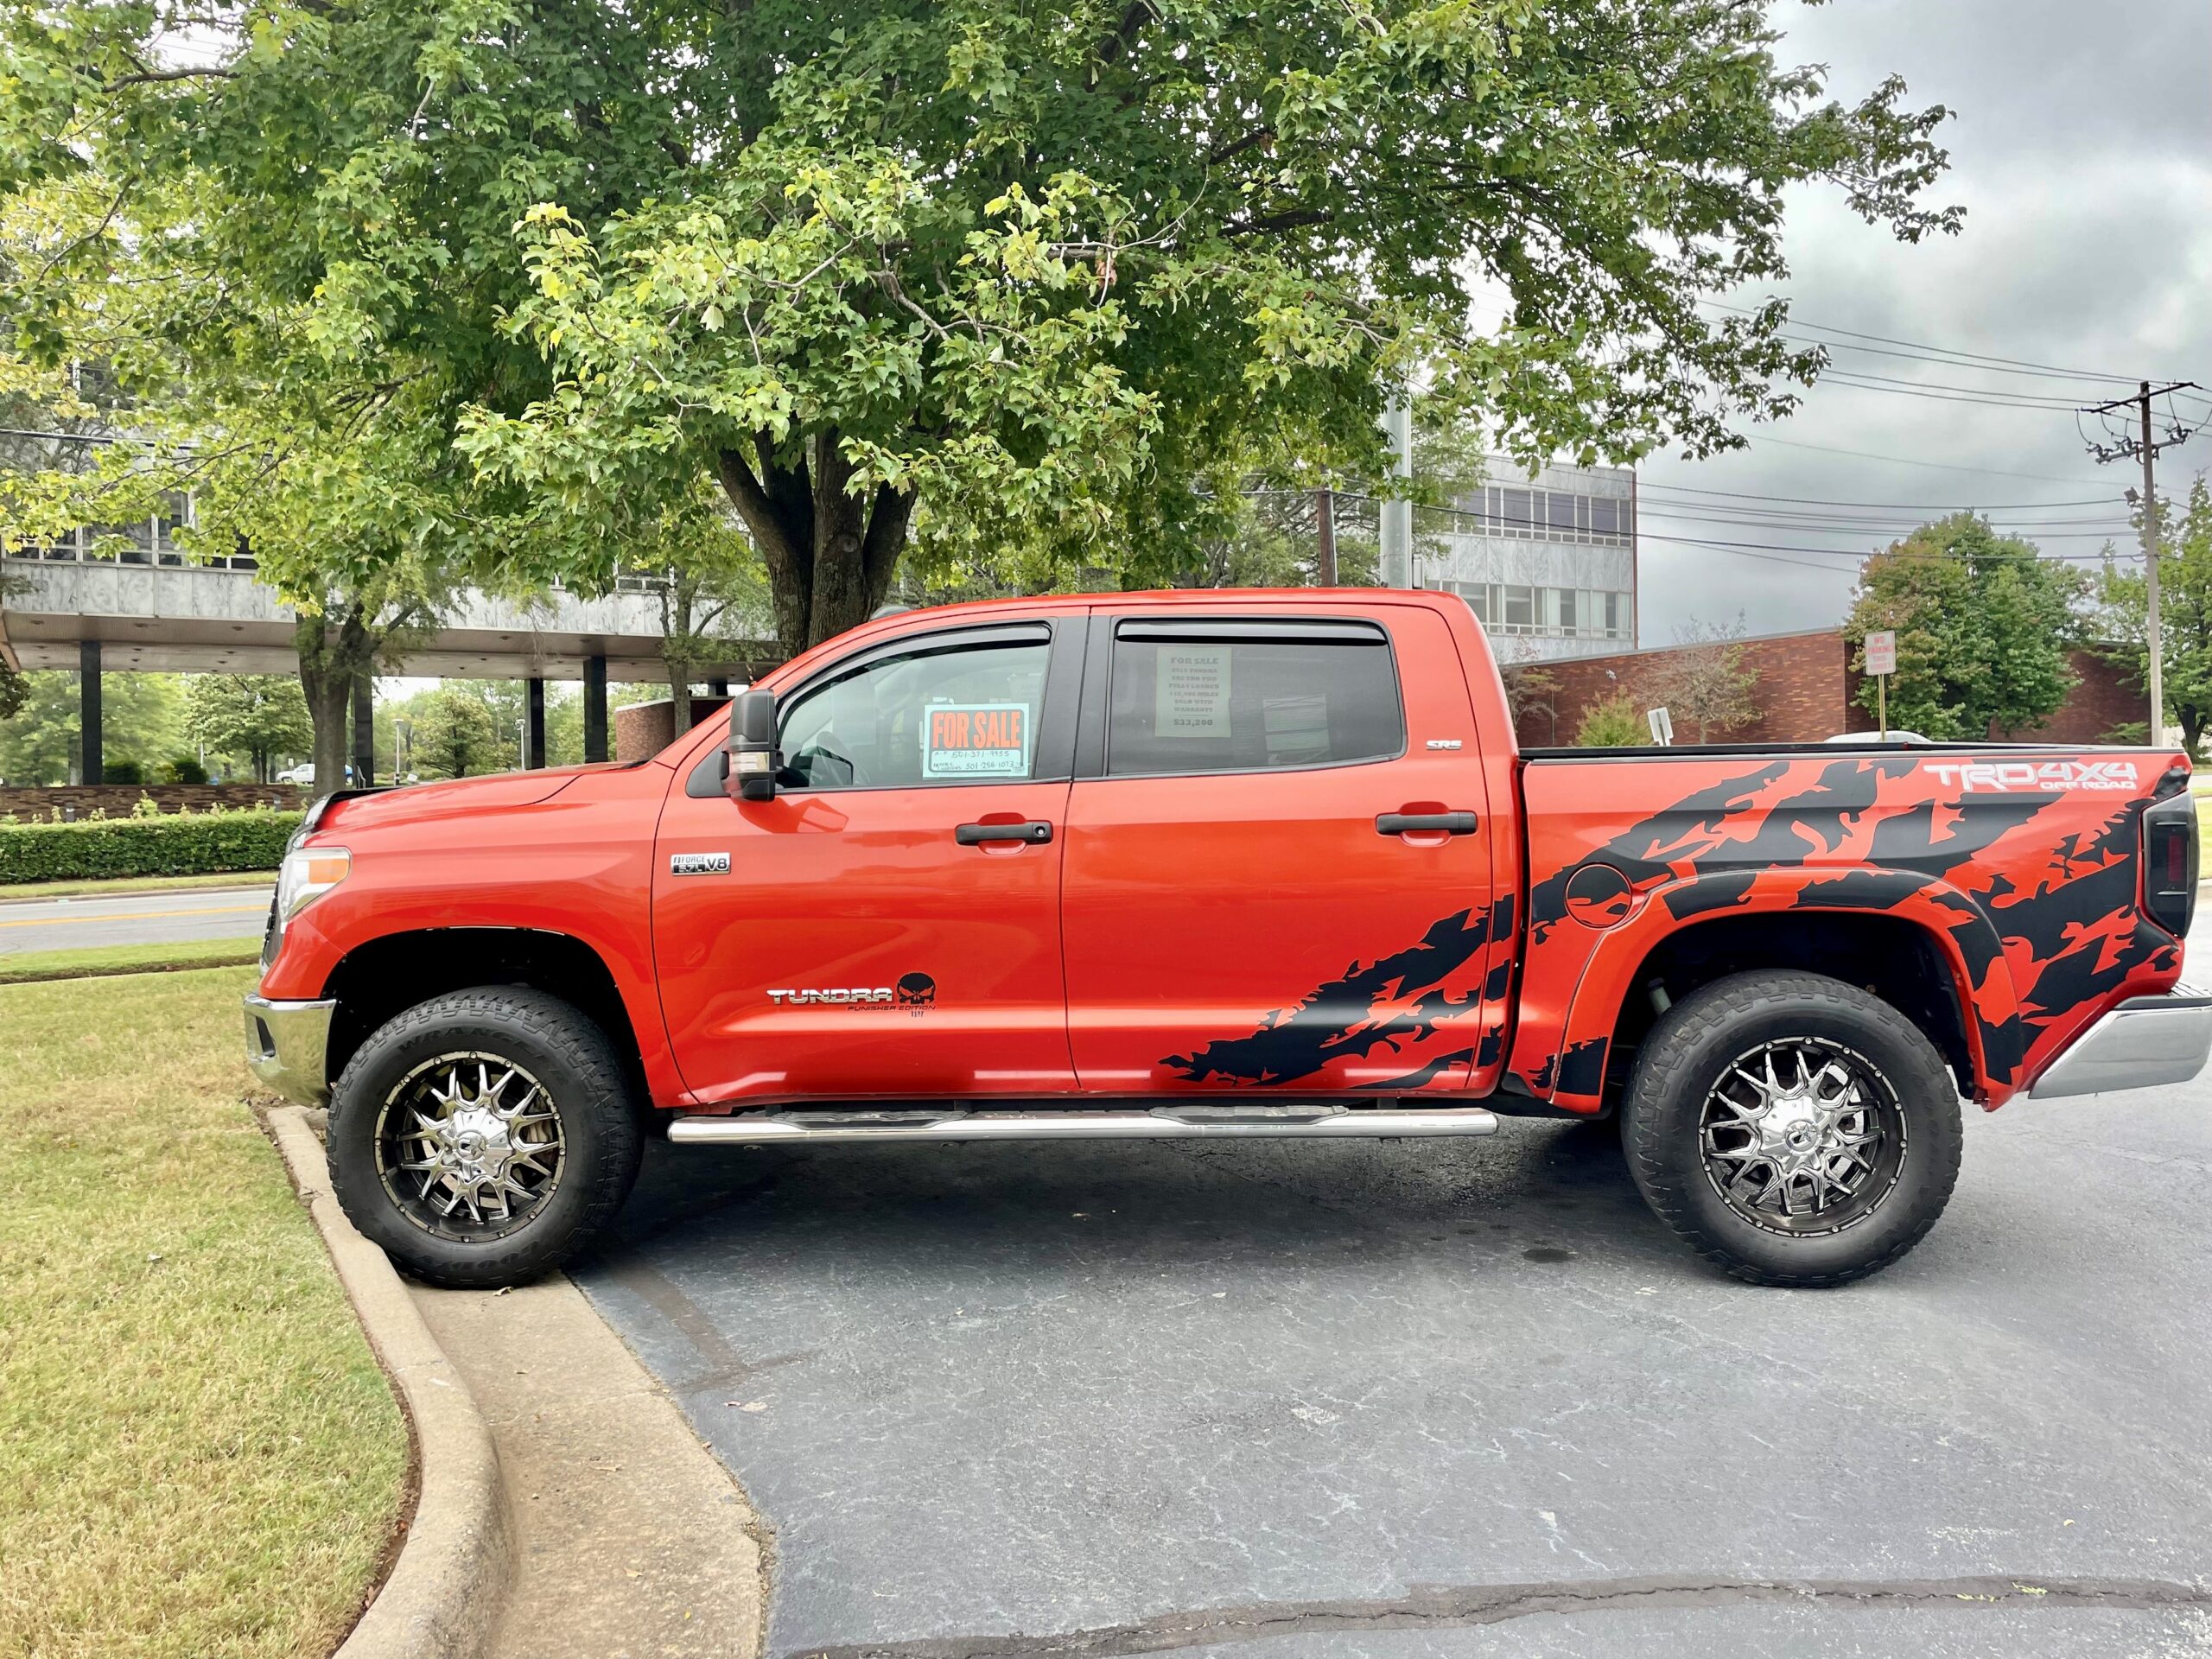 2016 TOYOTA TUNDRA CREW MAX 4 X 4 TRD OFF ROAD PUNISHER EDITION